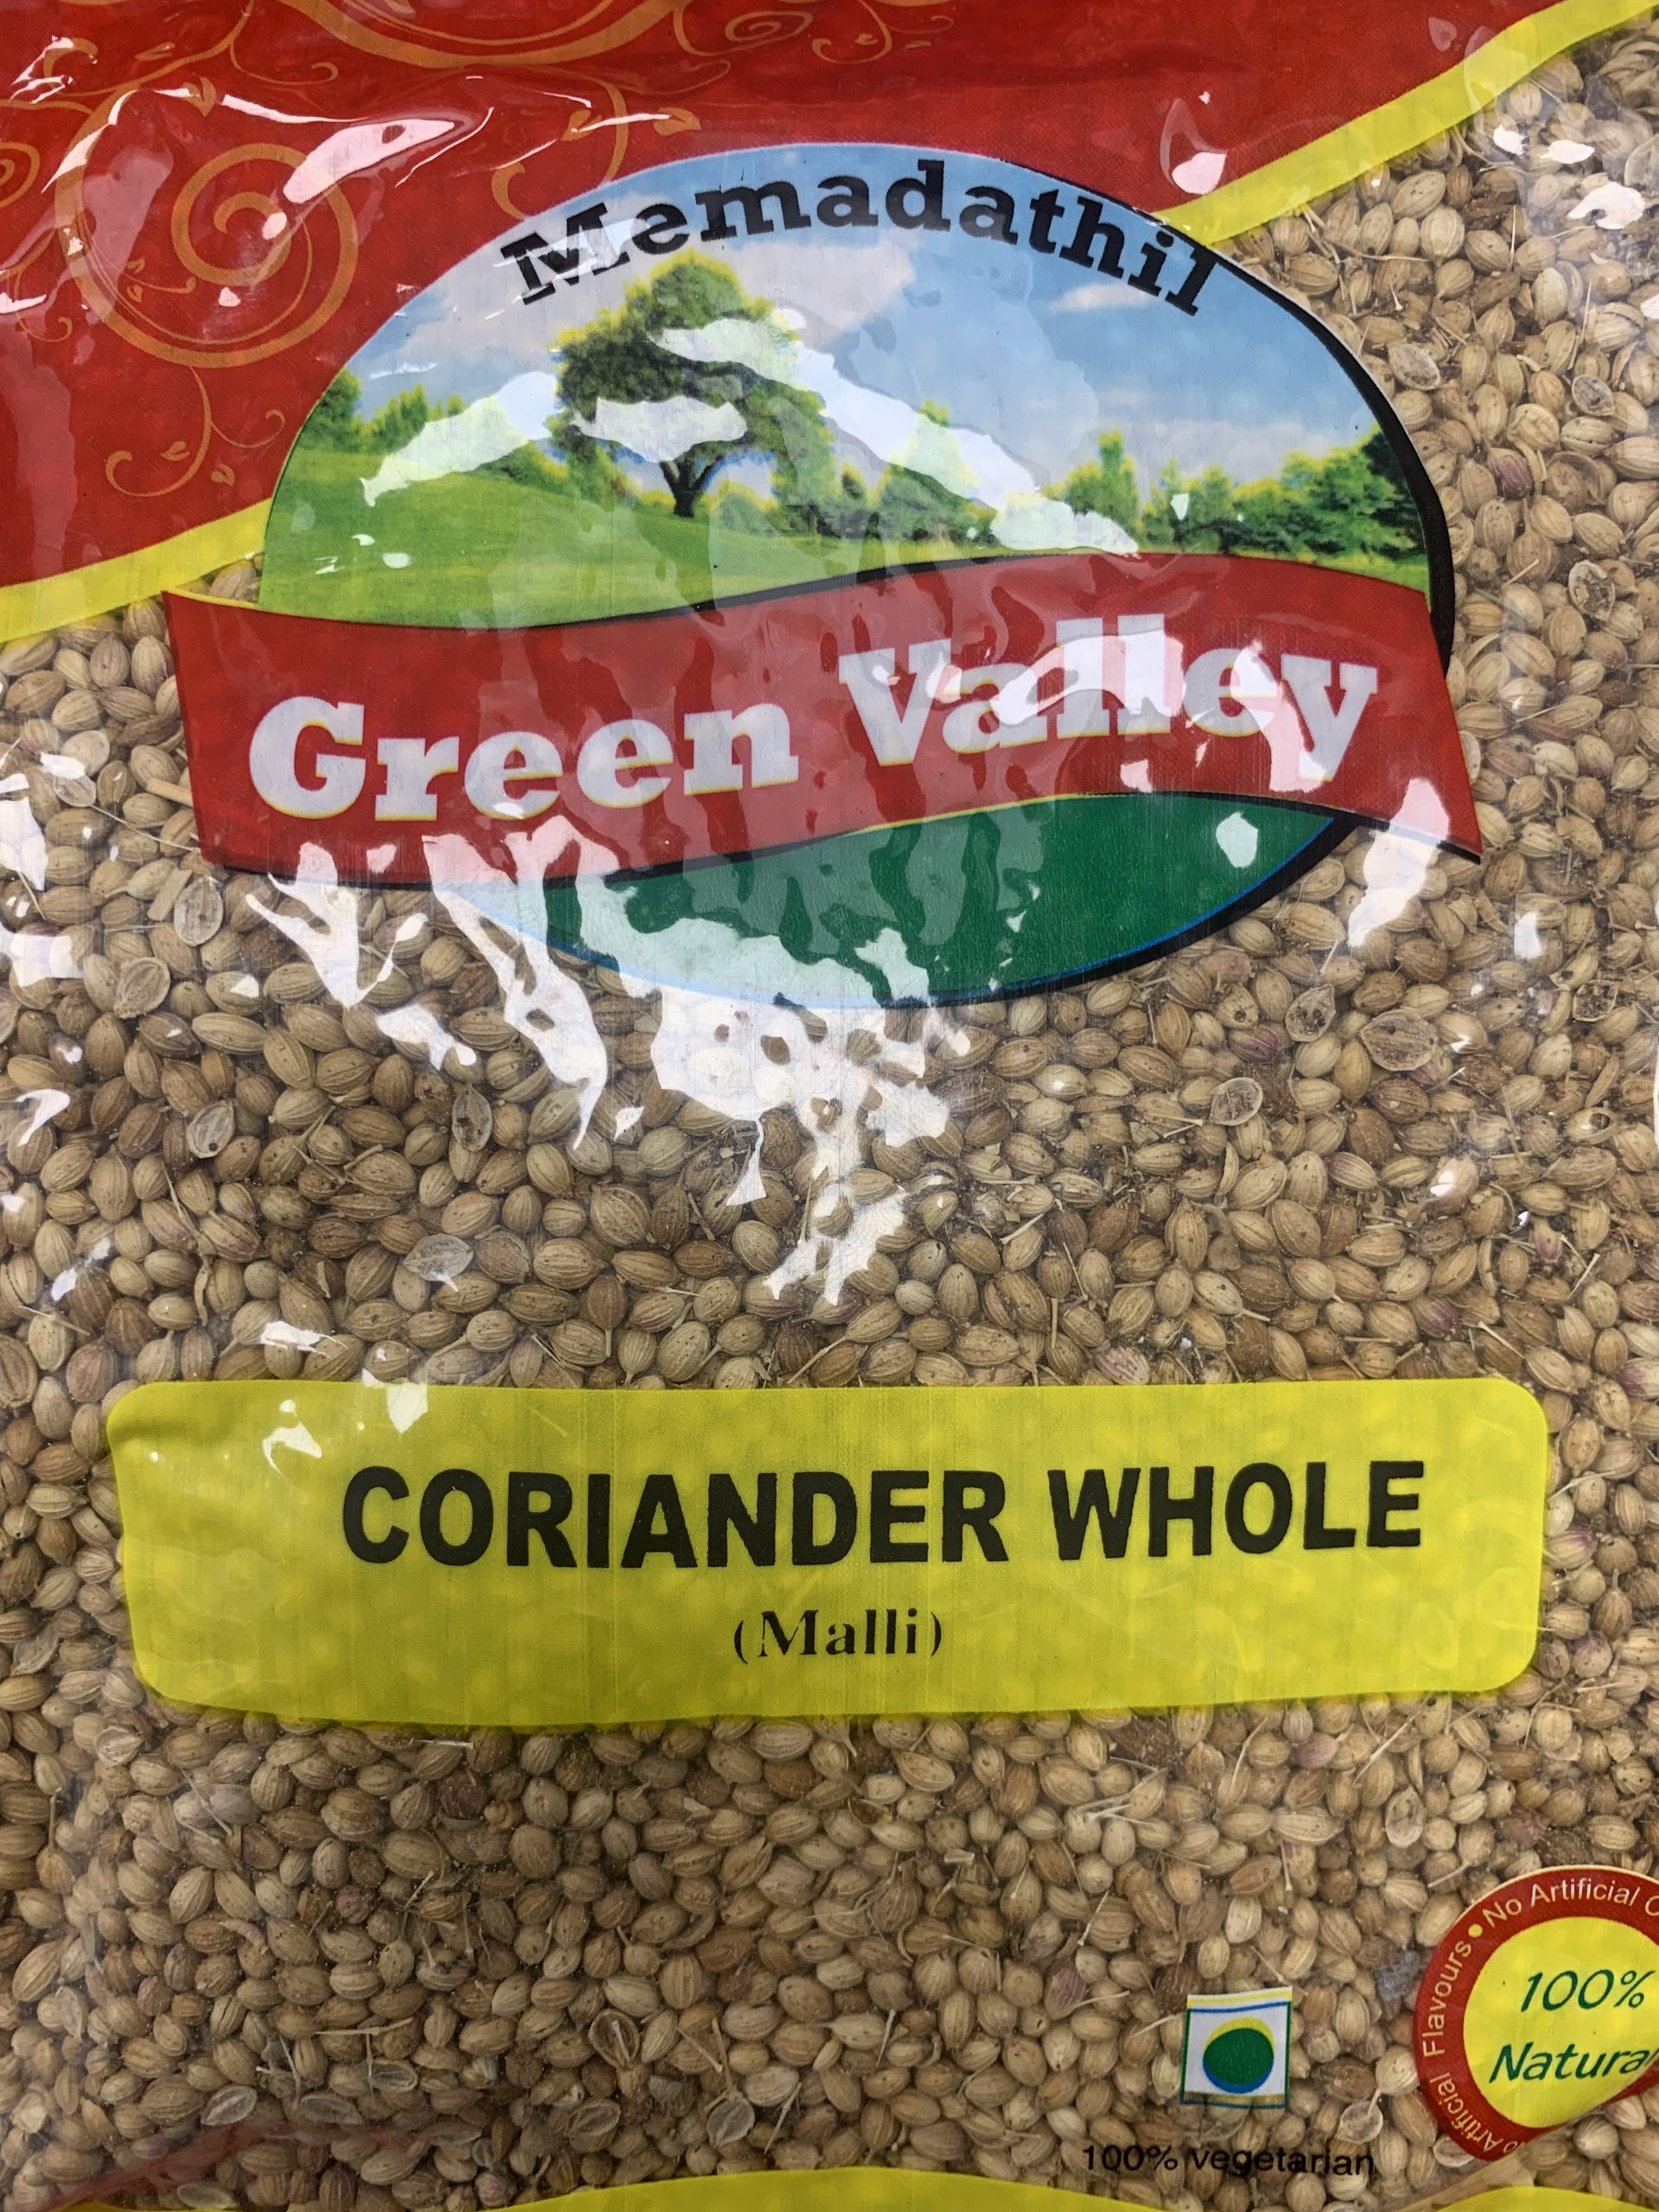 Green Valley Corriander whole 300g